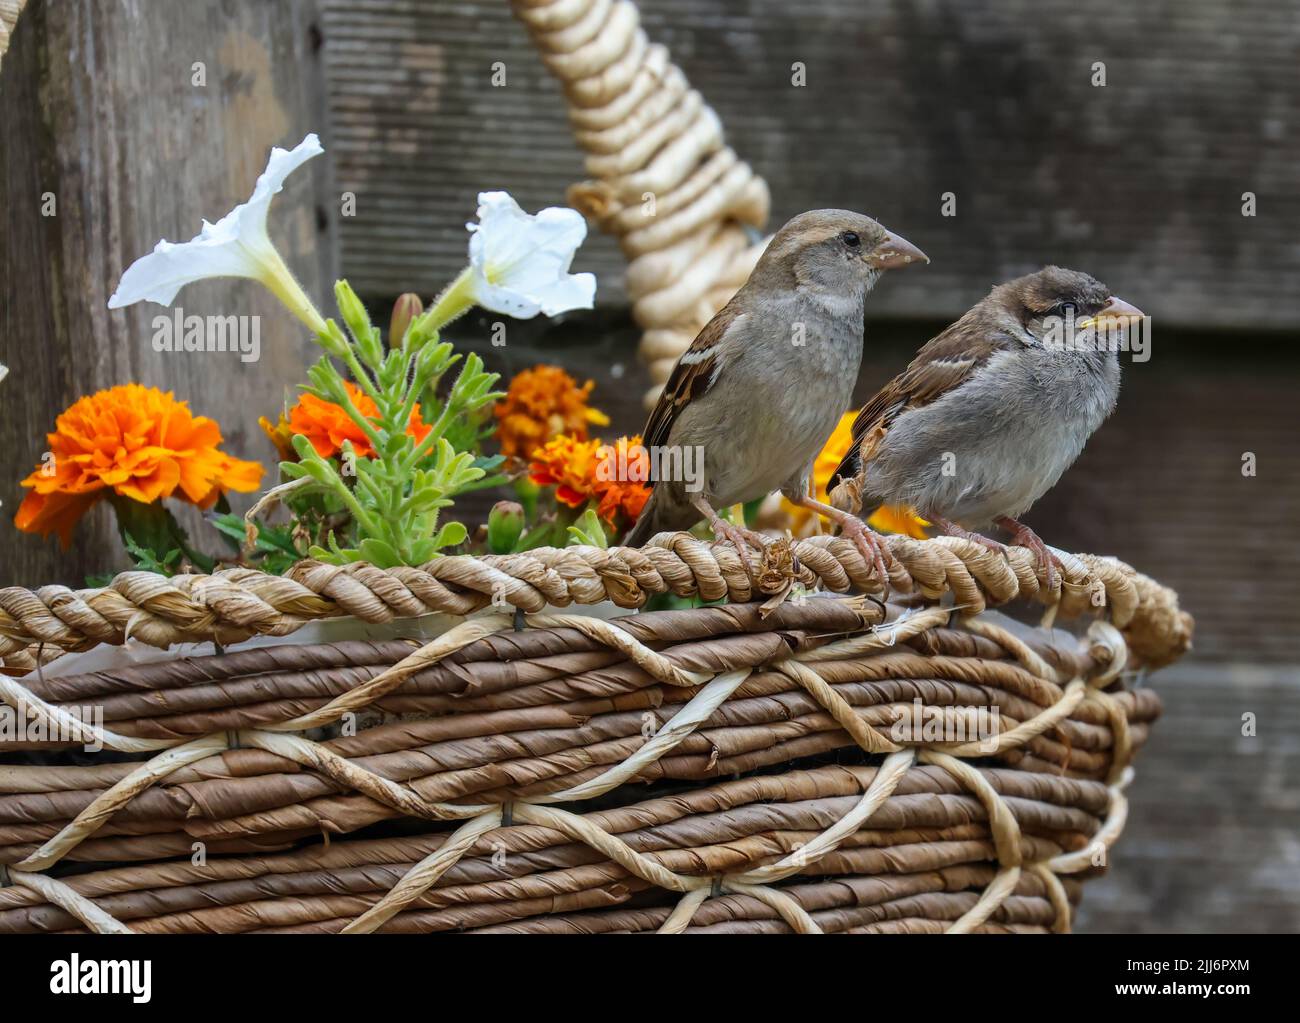 House sparrows, adult and cute baby chick fledgling 'Passer domesticus' in flower basket. Two birds beside colorful summer flowers. Dublin, Ireland Stock Photo